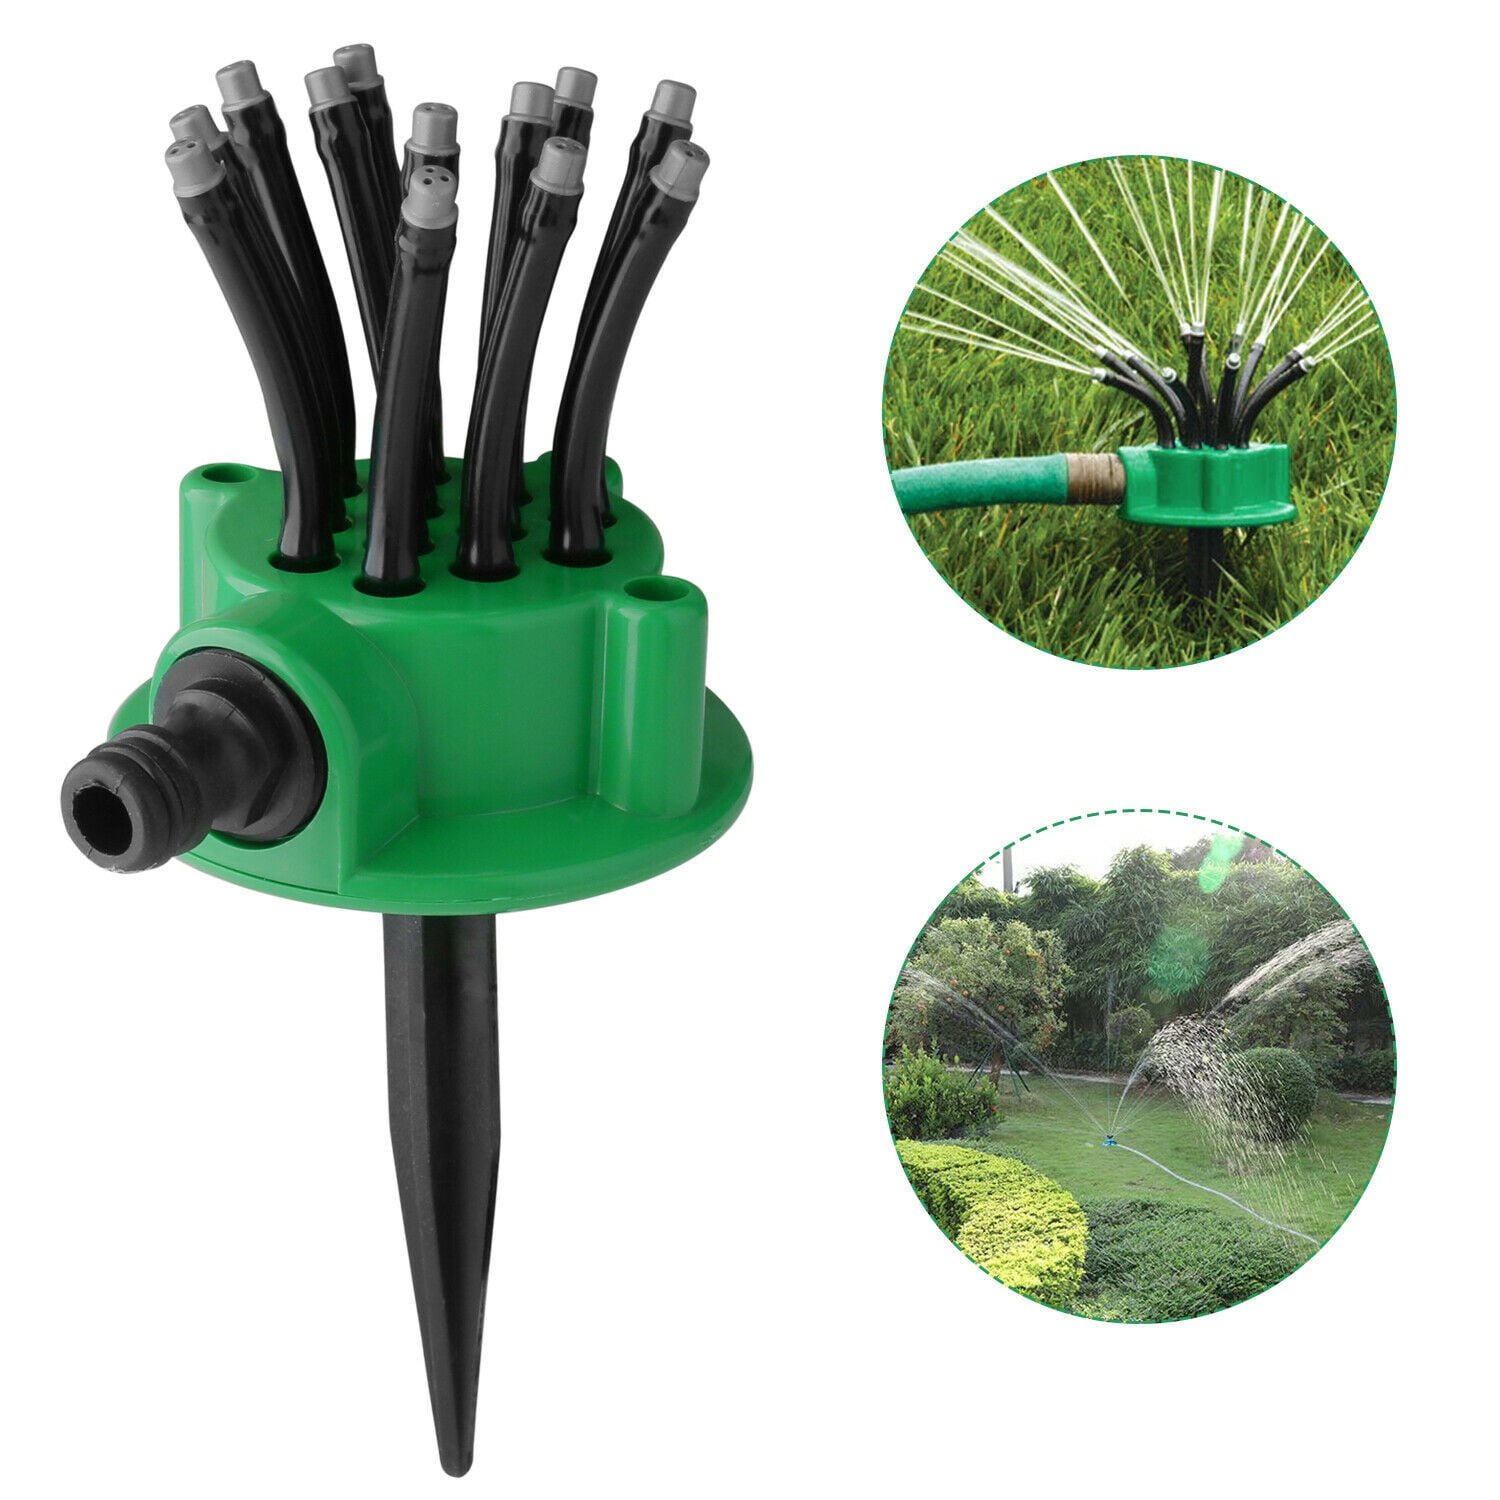 Details about   Up Sprinkler Adjustable Lawn Watering Head Garden Spray Nozzle M4W6 Thread L0E2